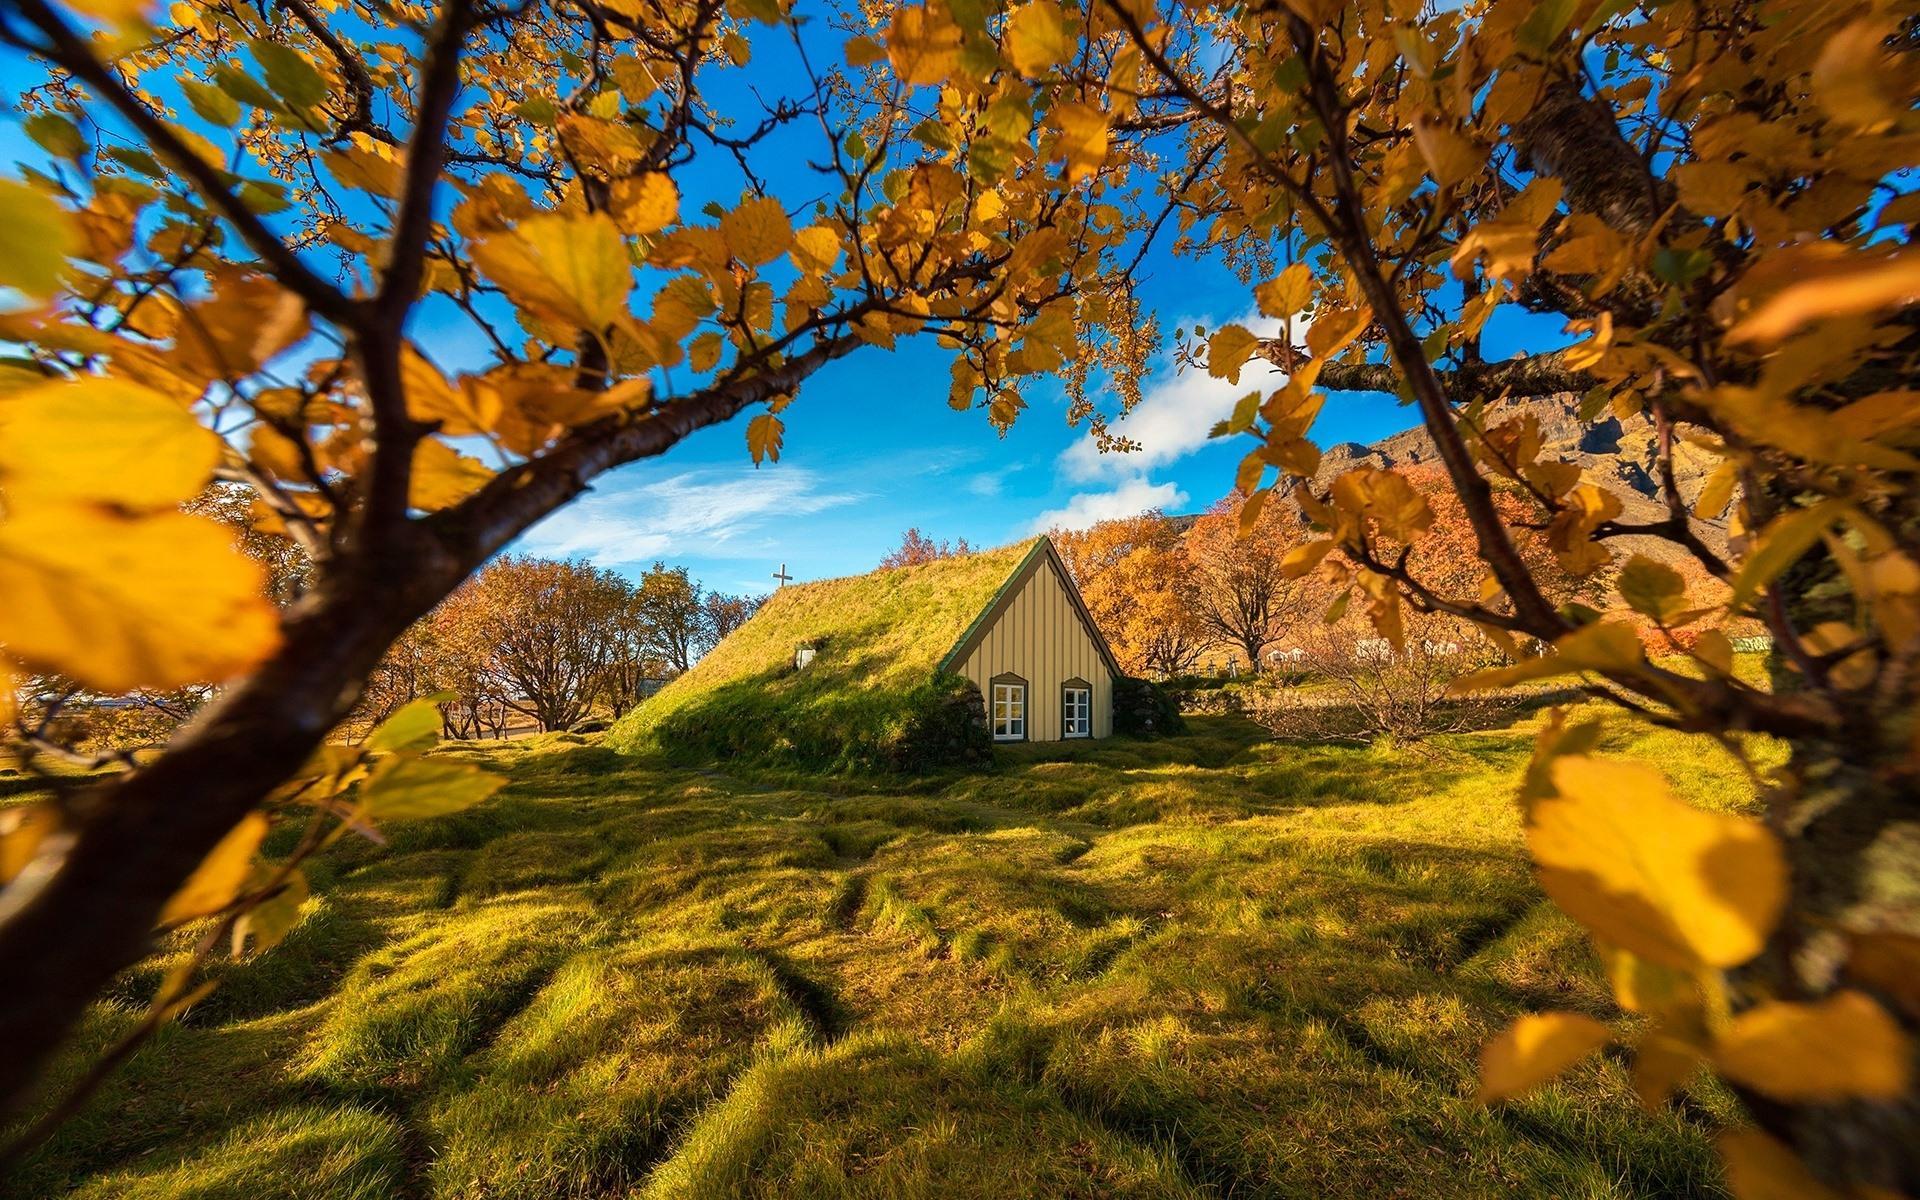 Download 1920x1200 Iceland, Church, Autumn, Fall, Leaves, Field